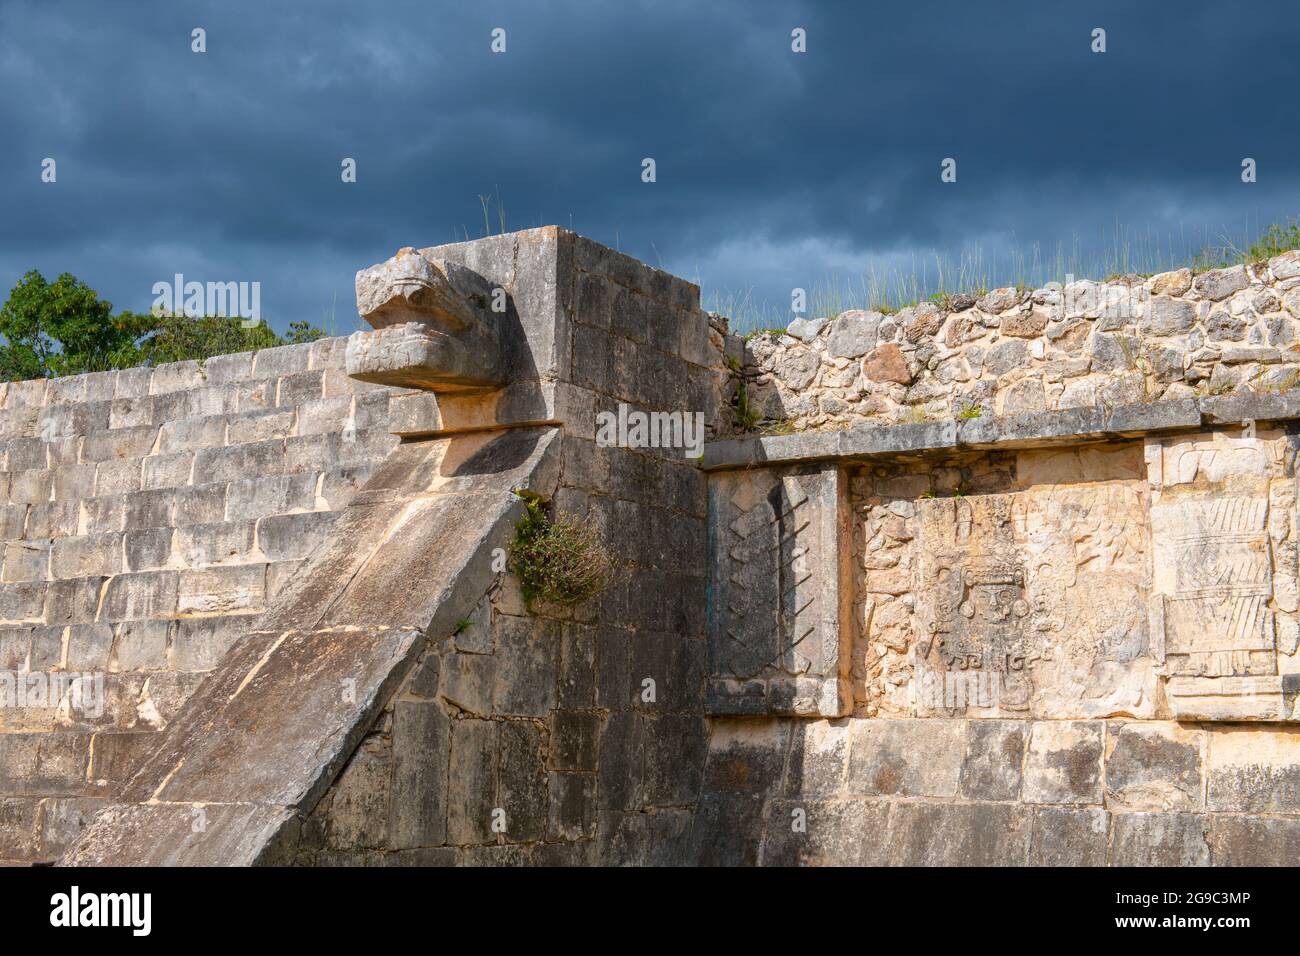 Tumba del Chac-mool (Tomb of the Chac Mool) at Chichen Itza archaeological site in Yucatan, Mexico. Chichen Itza is a UNESCO World Heritage Site. Stock Photo